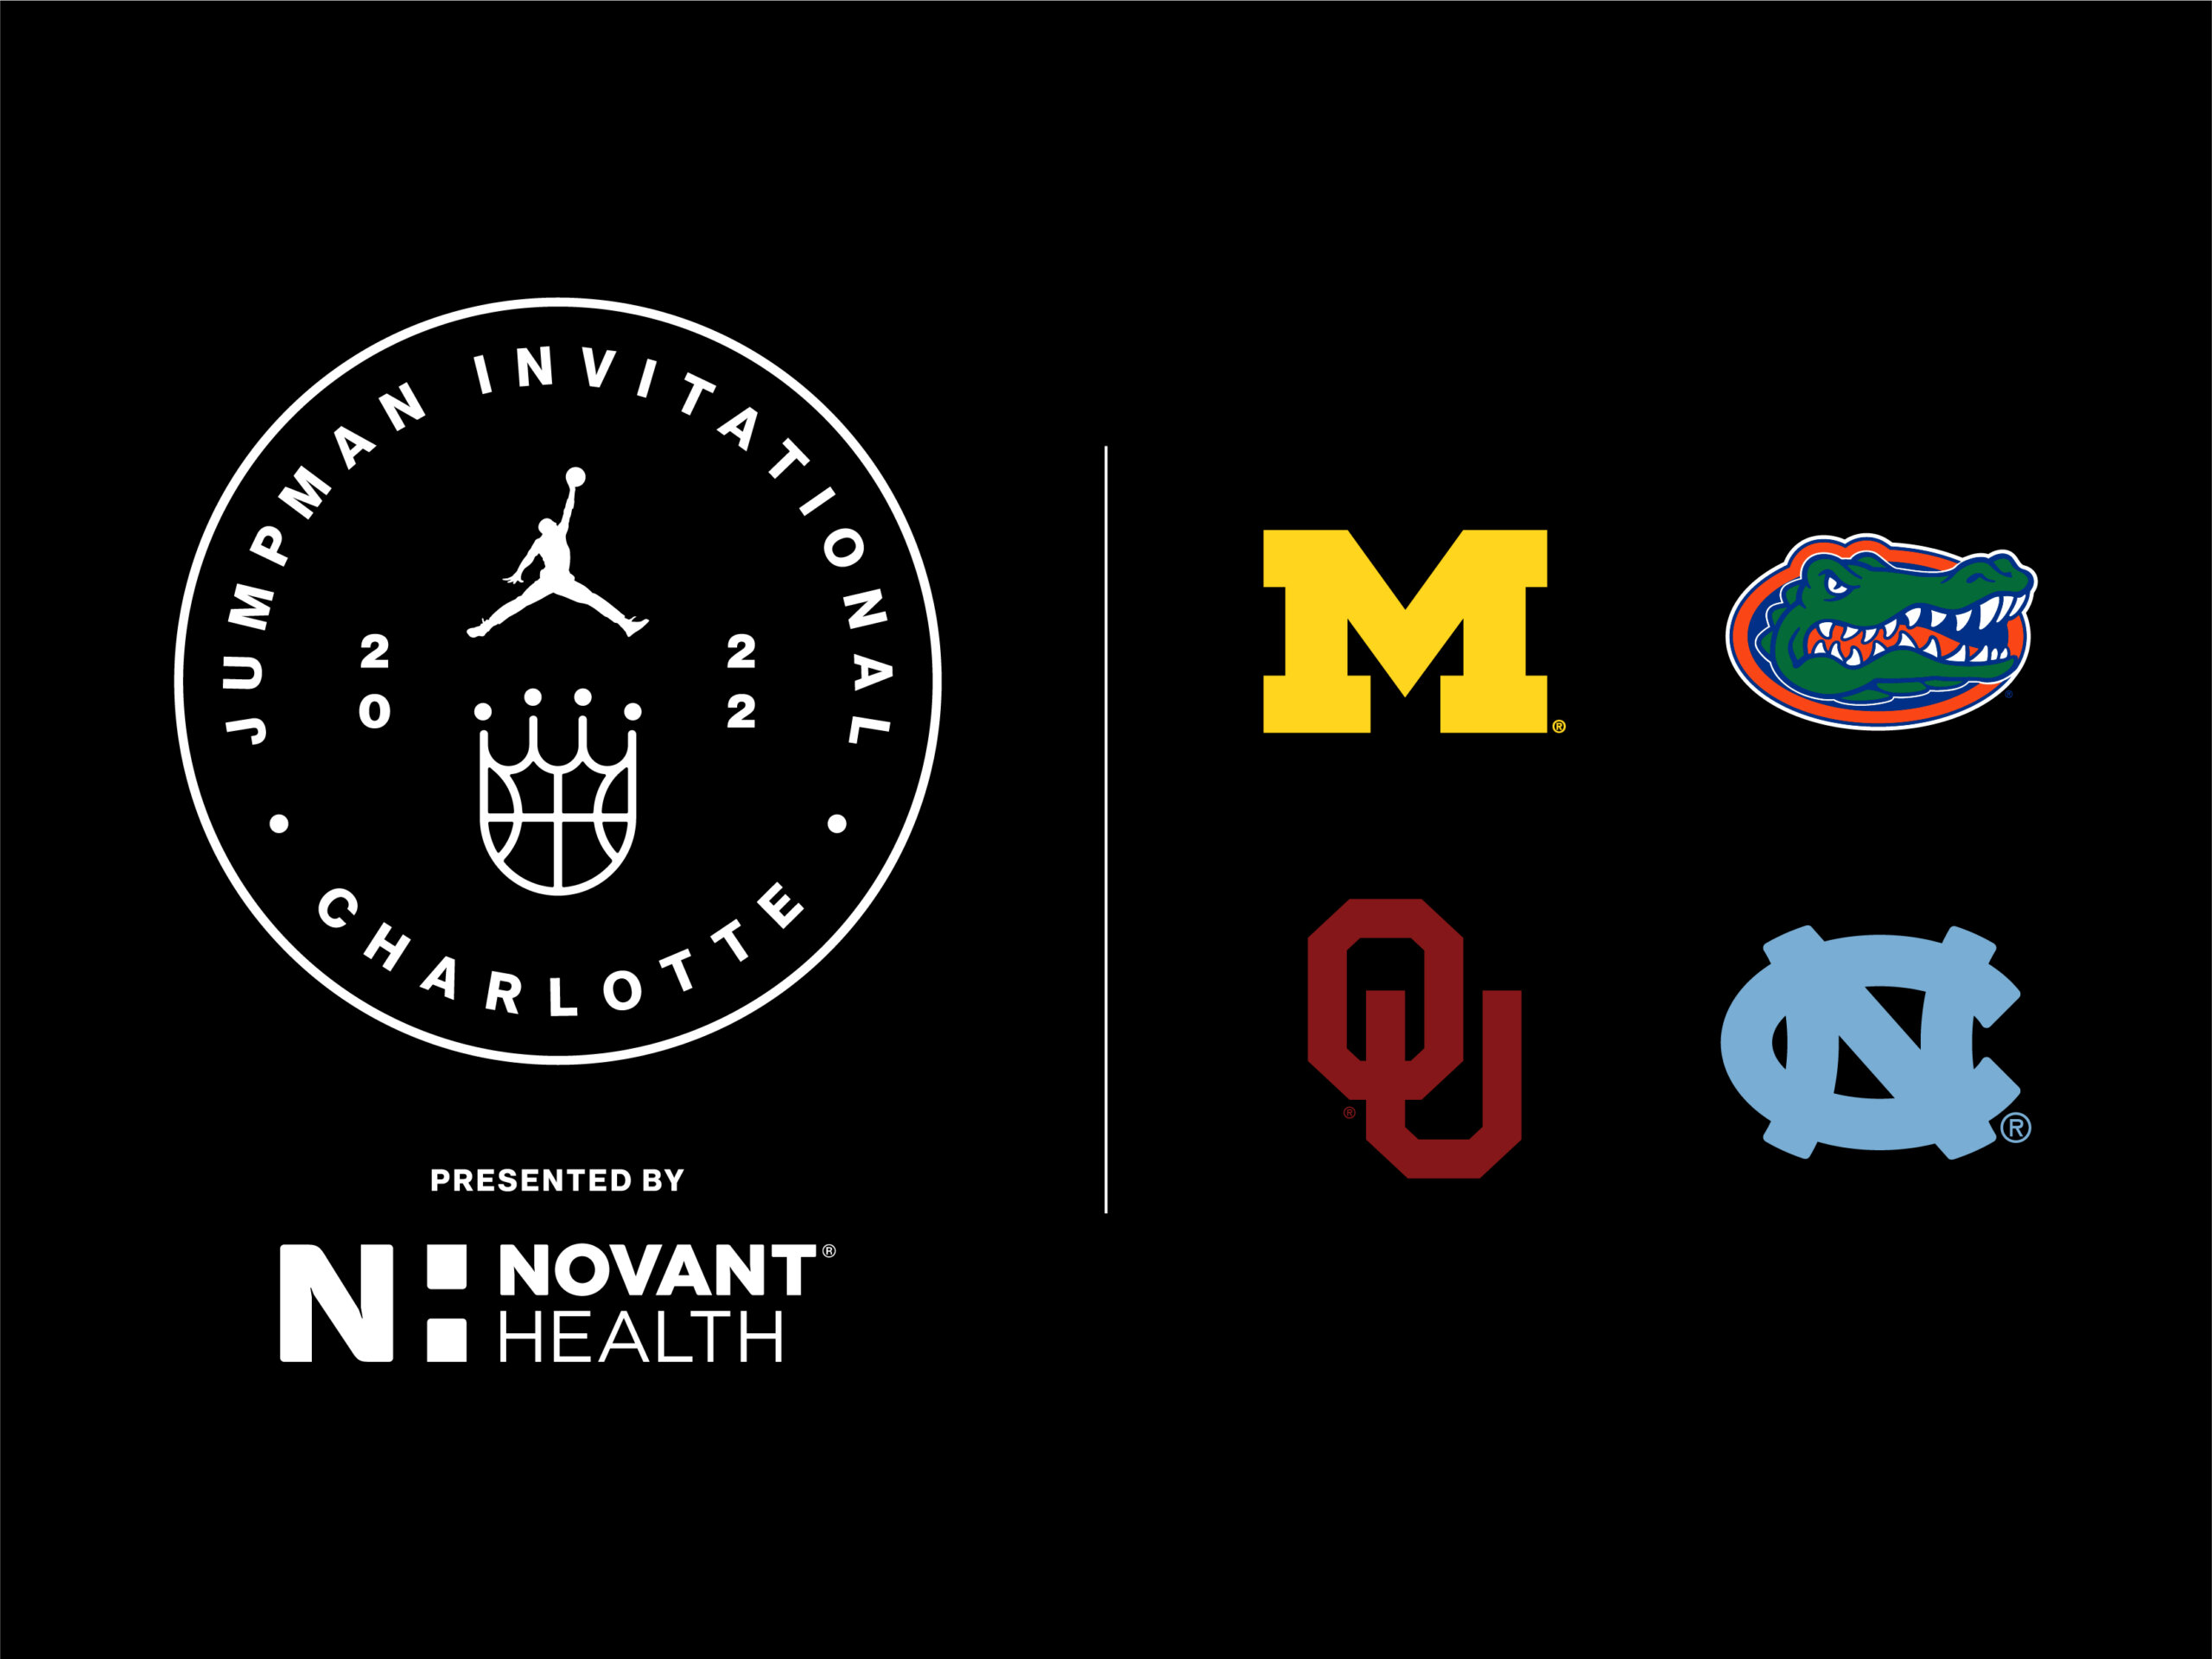 Jumpman Invitational Presented by Novant Health Announces Lineup of Games to be Featured on ESPN Networks